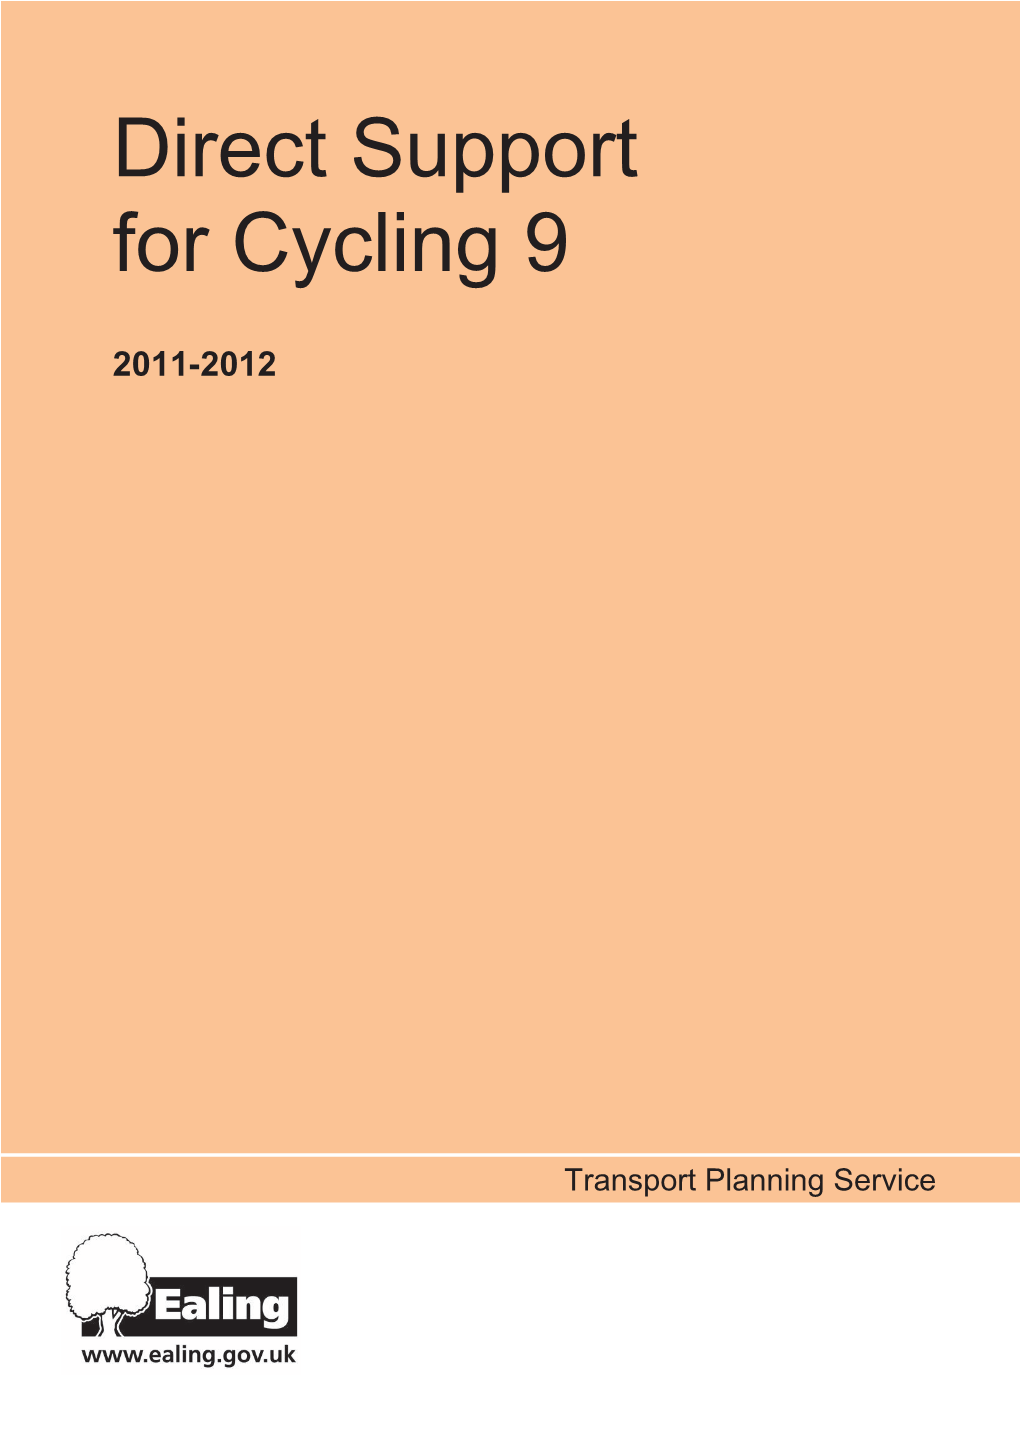 Direct Support for Cycling 9